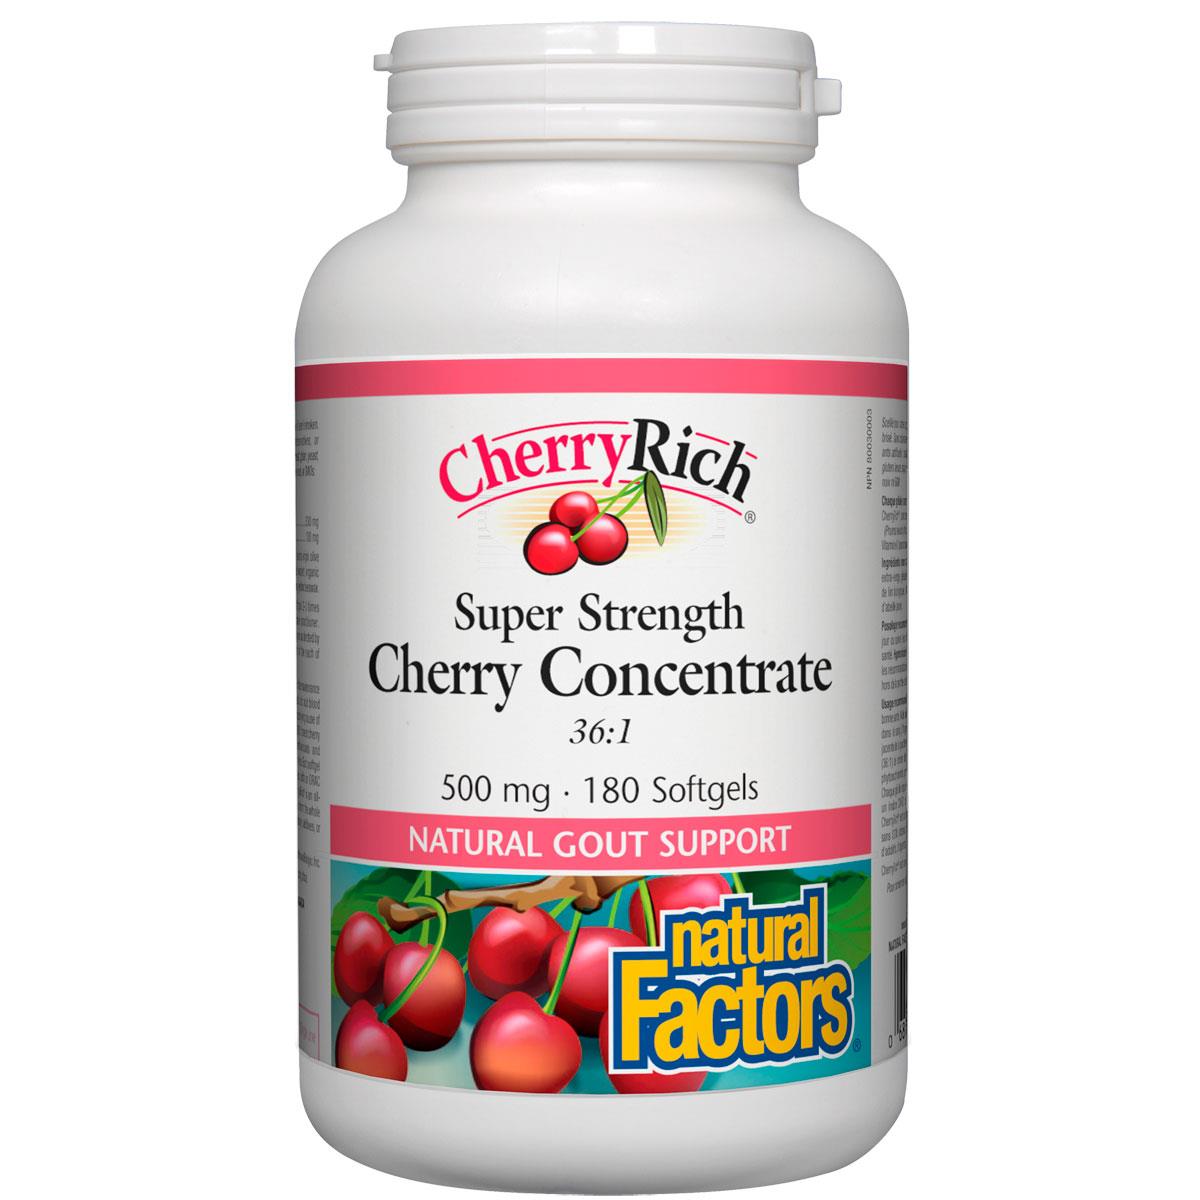 Natural Factors CherryRich Super Strength Cherry Concentrate, 500mg, 180 Softgels